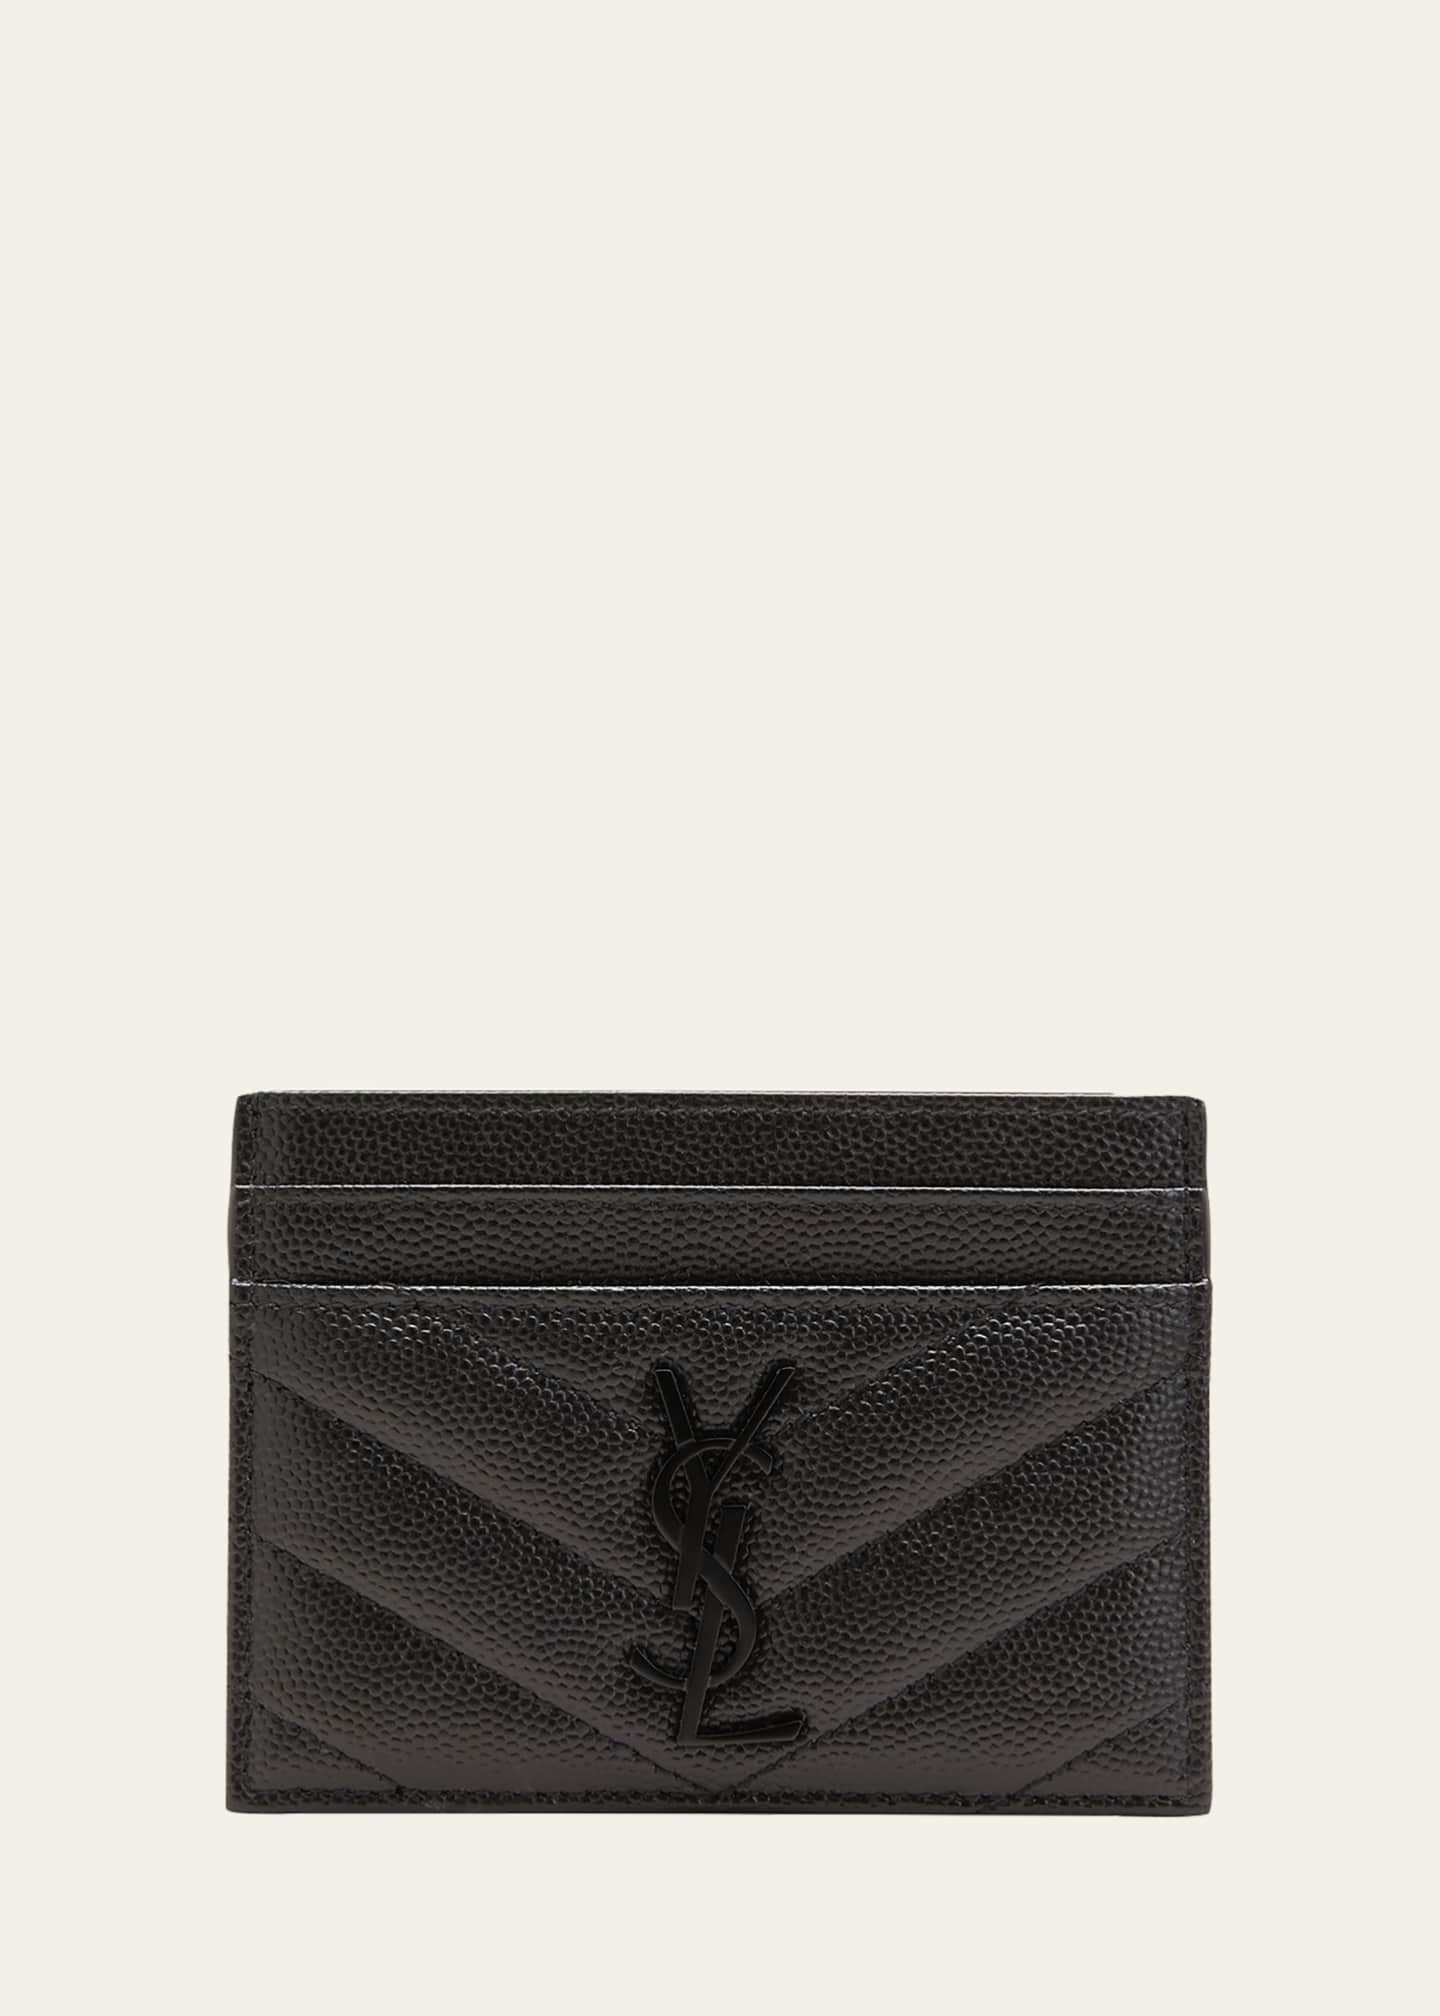 Saint Laurent YSL Monogram Card Case in Grained Leather Image 1 of 4